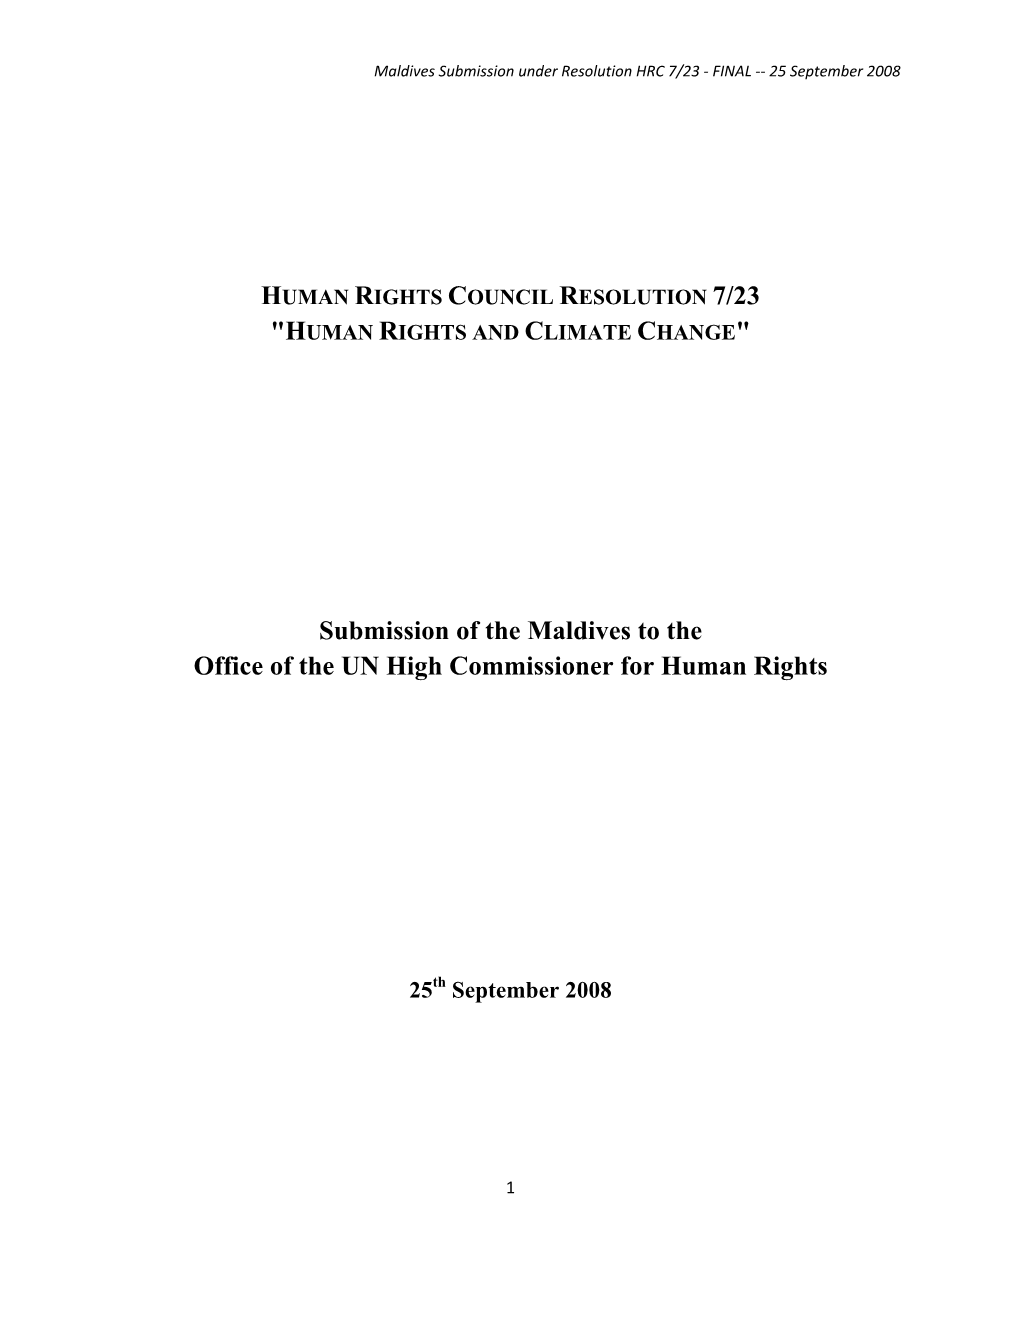 Submission of the Maldives to the Office of the UN High Commissioner for Human Rights